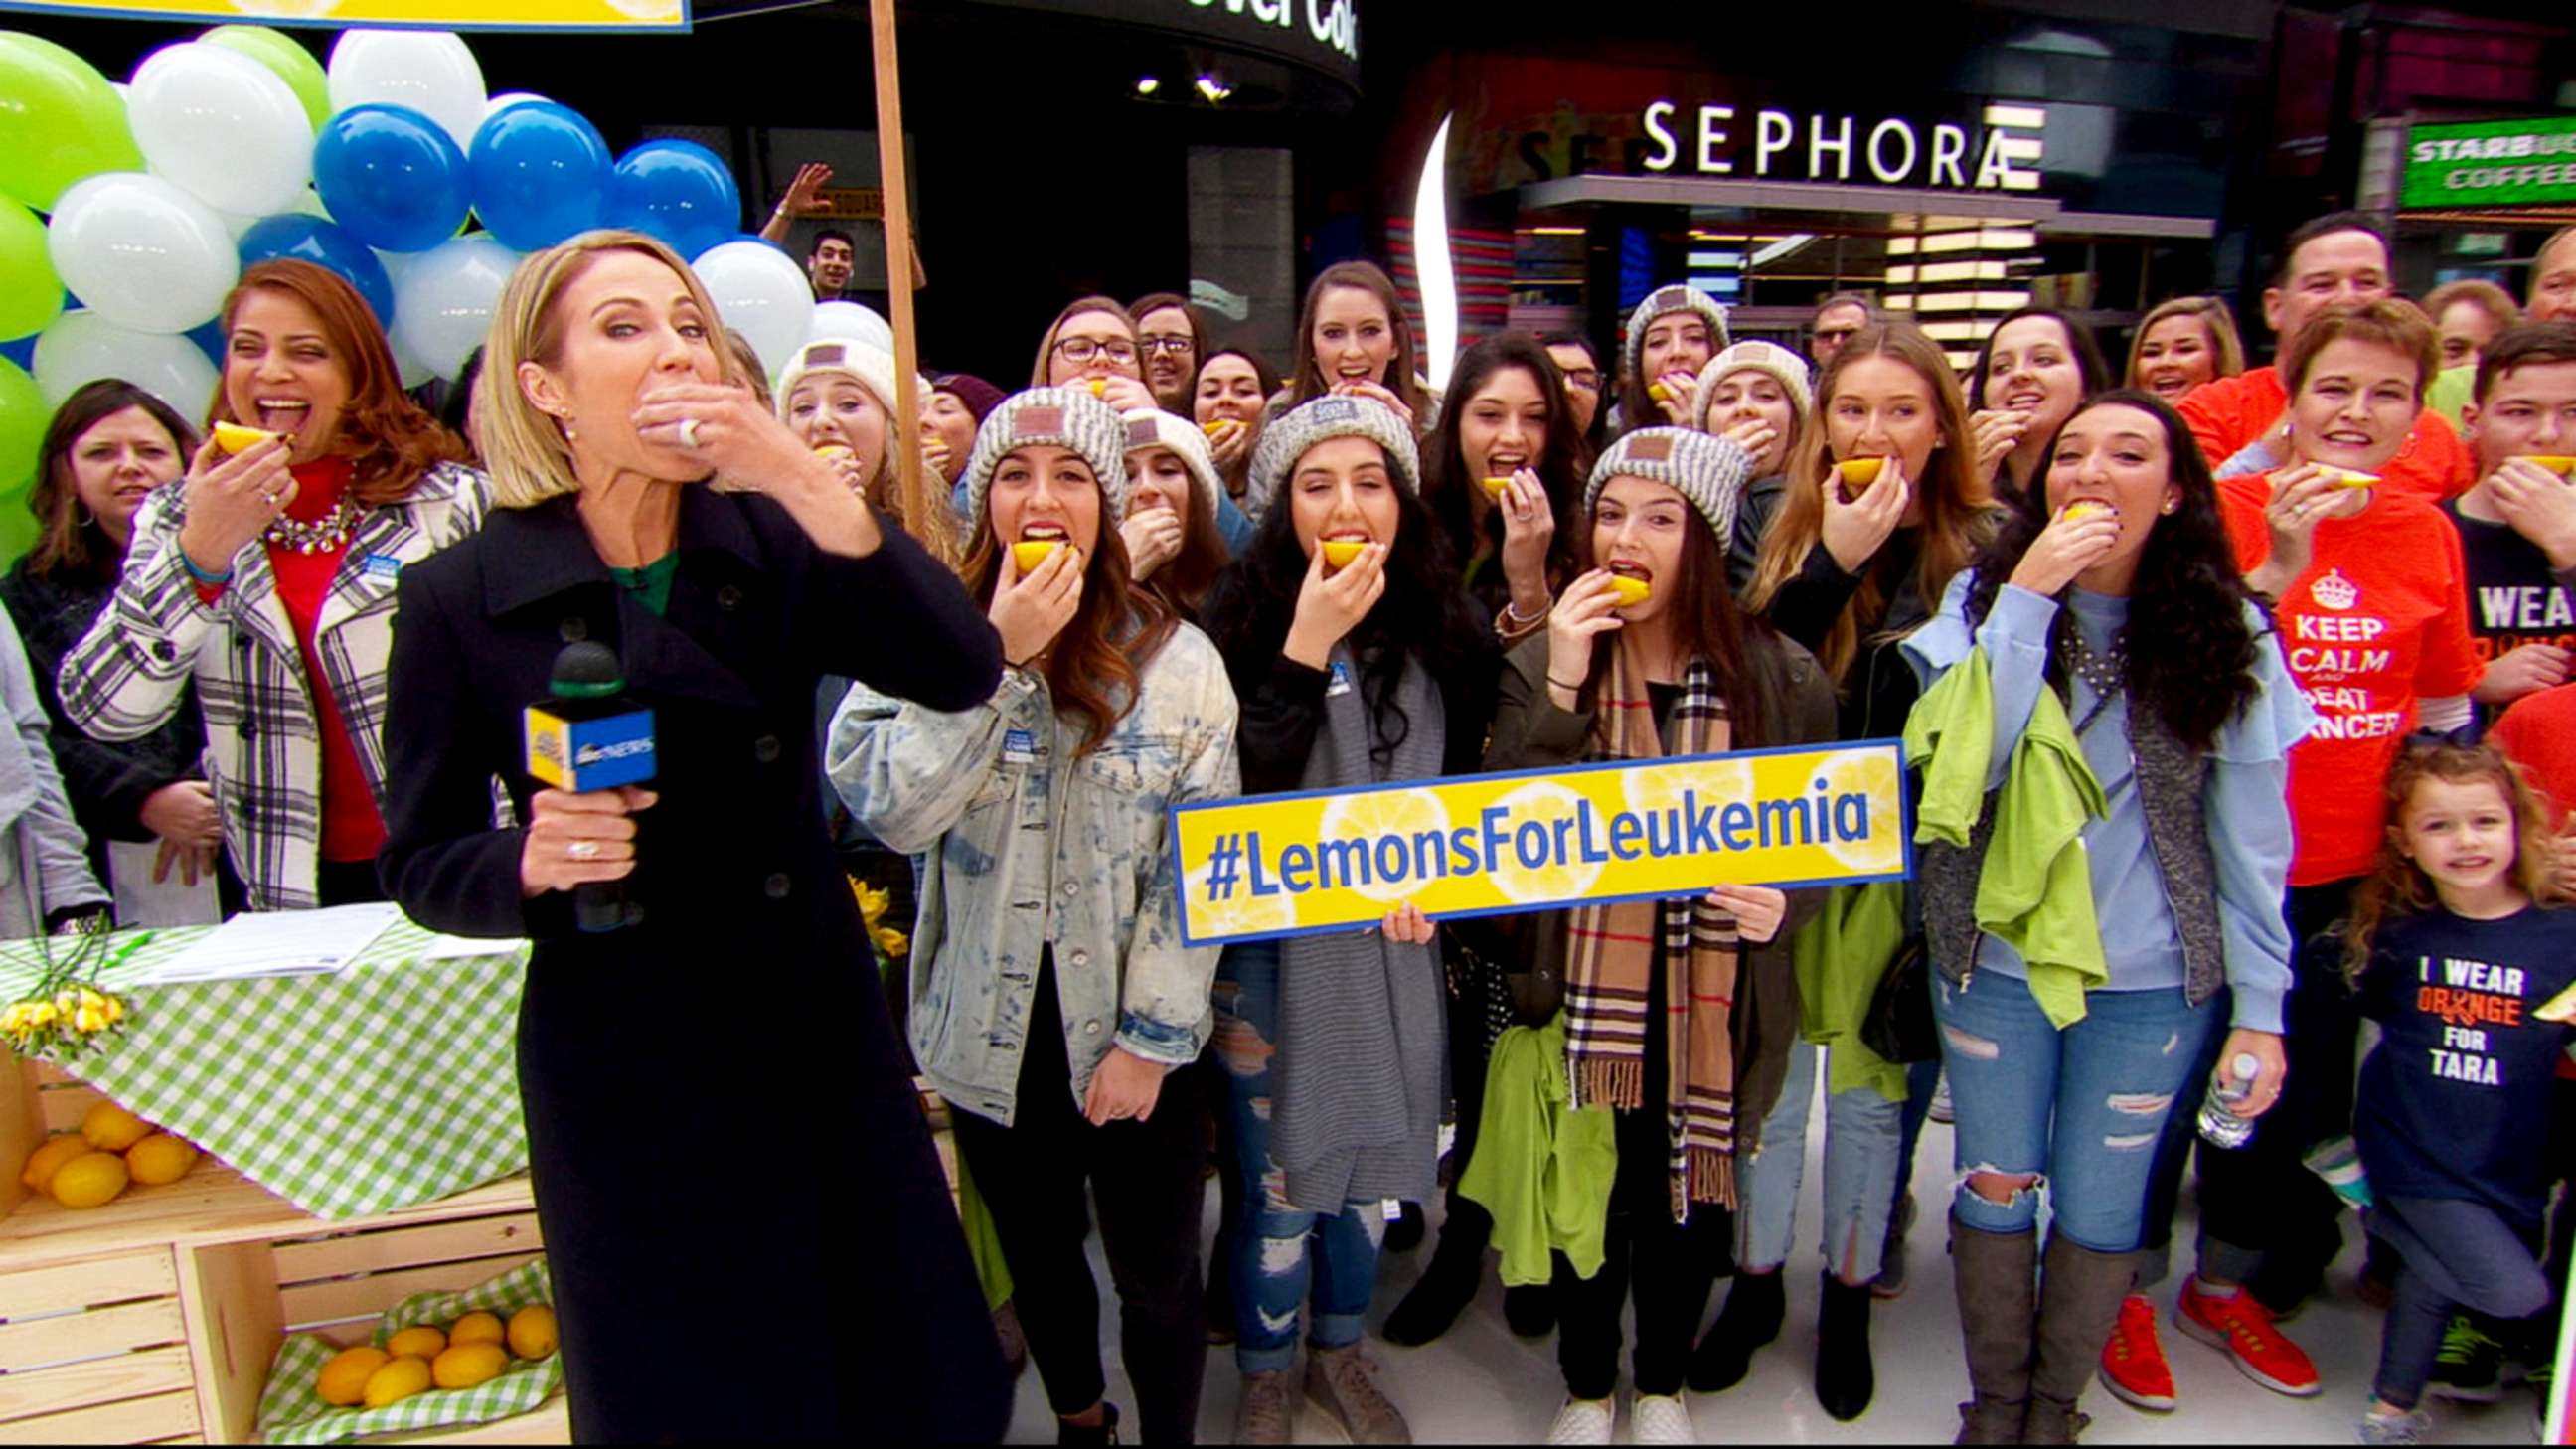 PHOTO: People outside the "Good Morning America" studio in Times Square take part in the "Lemons for Leukemia Challenge," a social media campaign to raise awareness about bone marrow donation